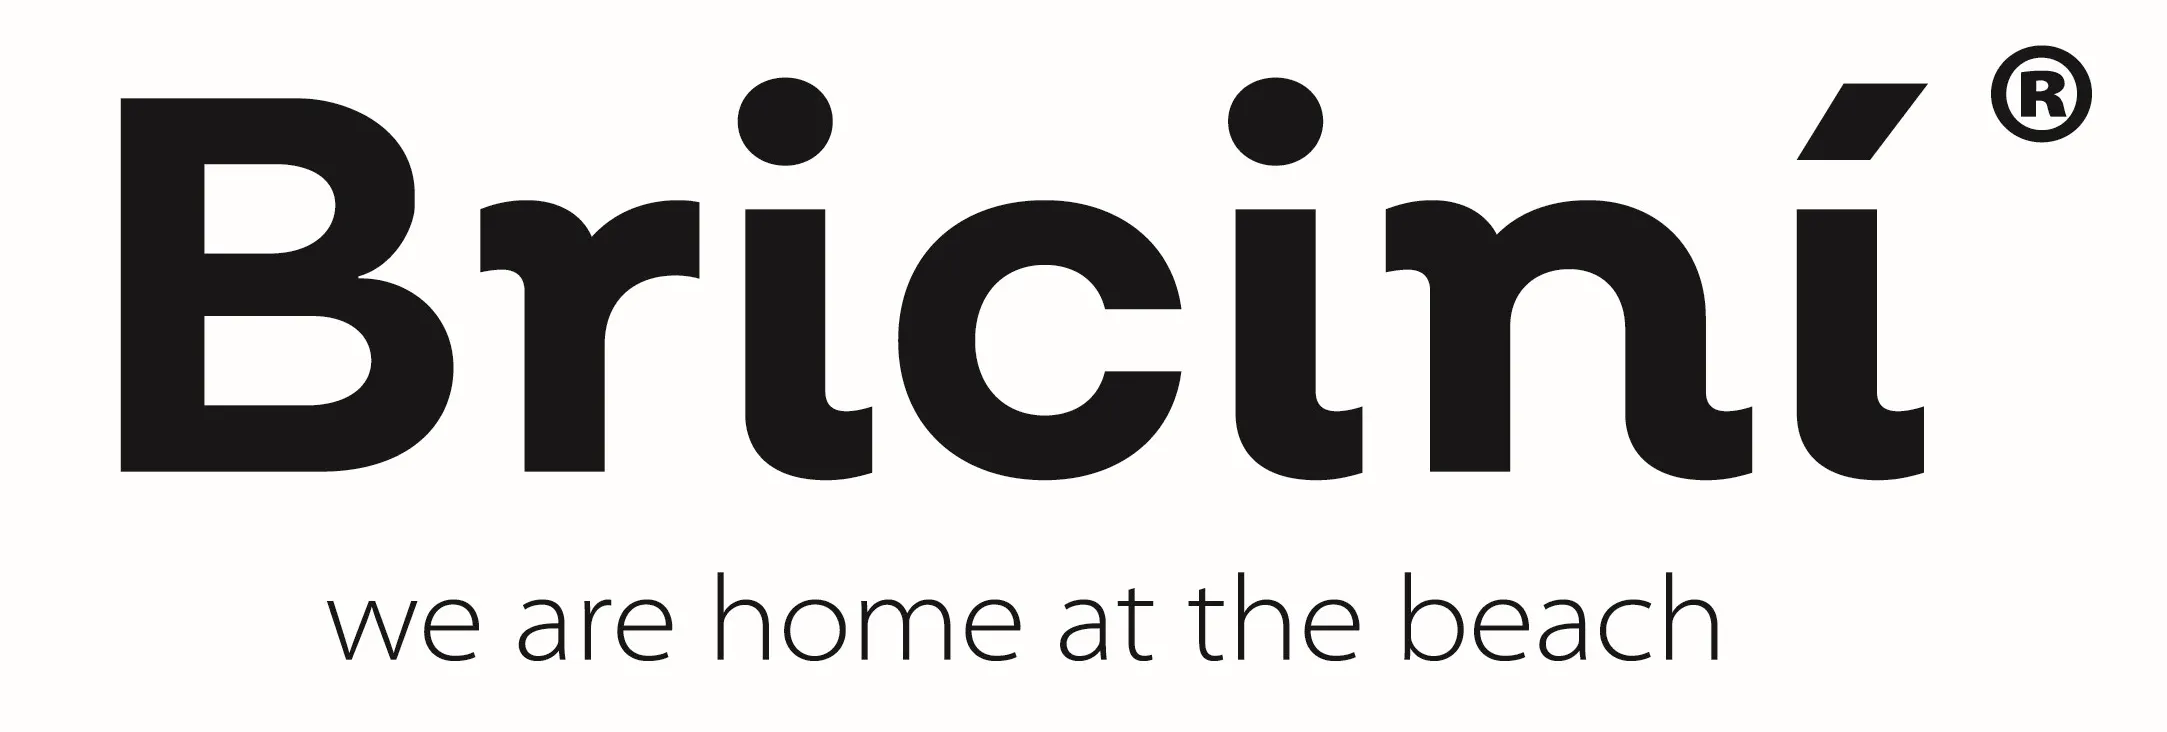 Bricini Logo Luxury Towels and Linens